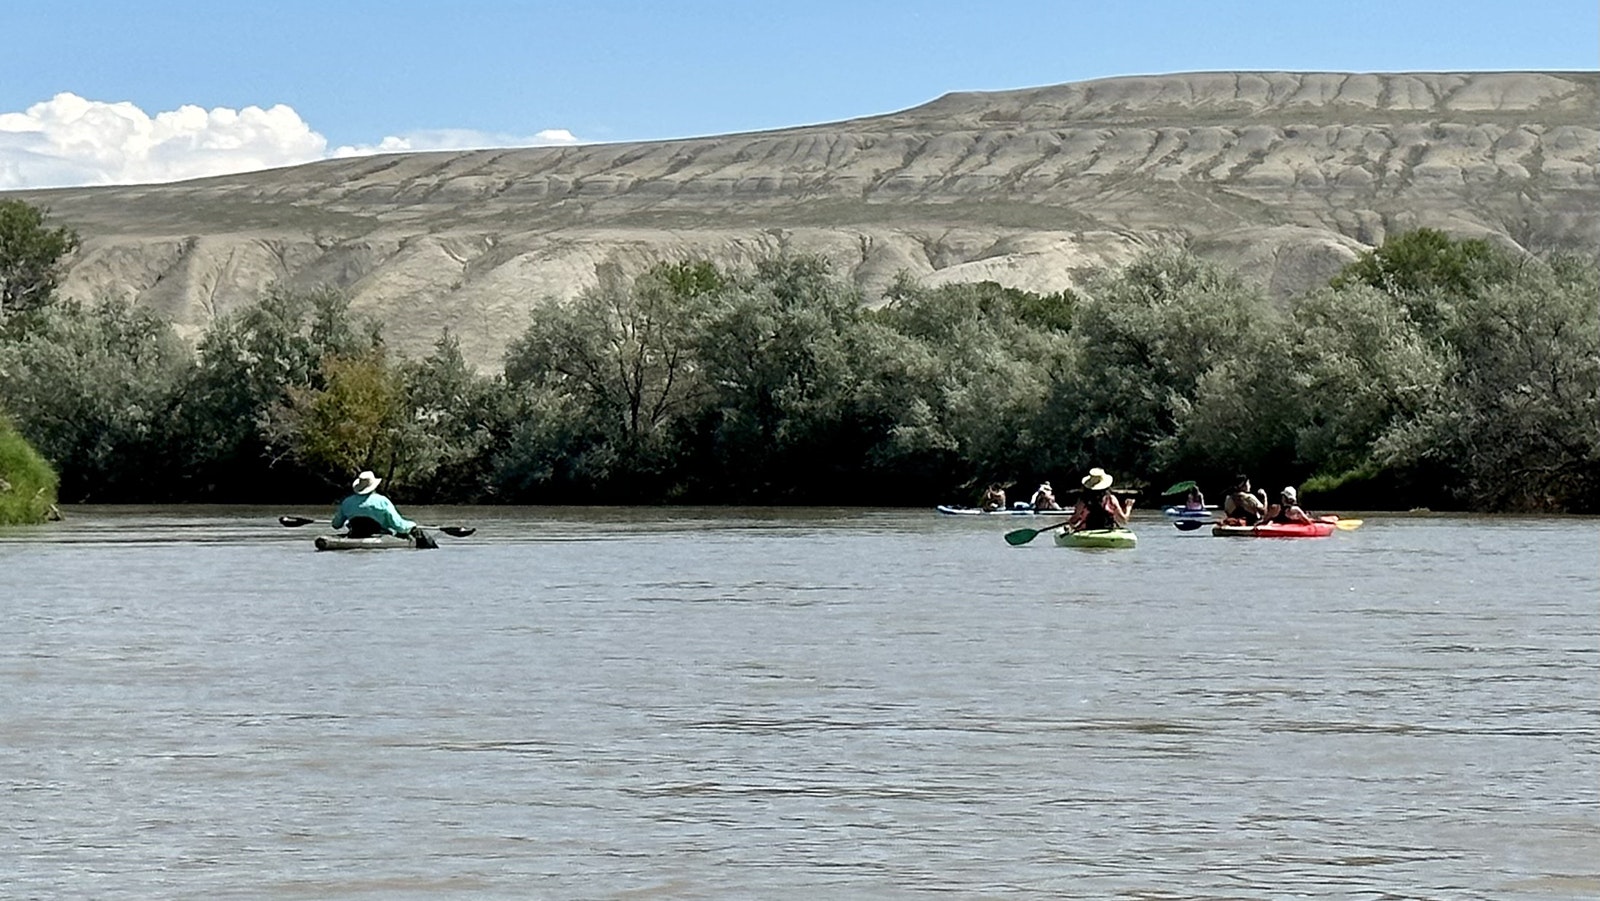 A view of the badlands from the Bighorn River. There aren't many boat ramps or campsites along the Bighorn River, which the Bighorn River Blueway would improve through new infrastructure at various points along the banks.